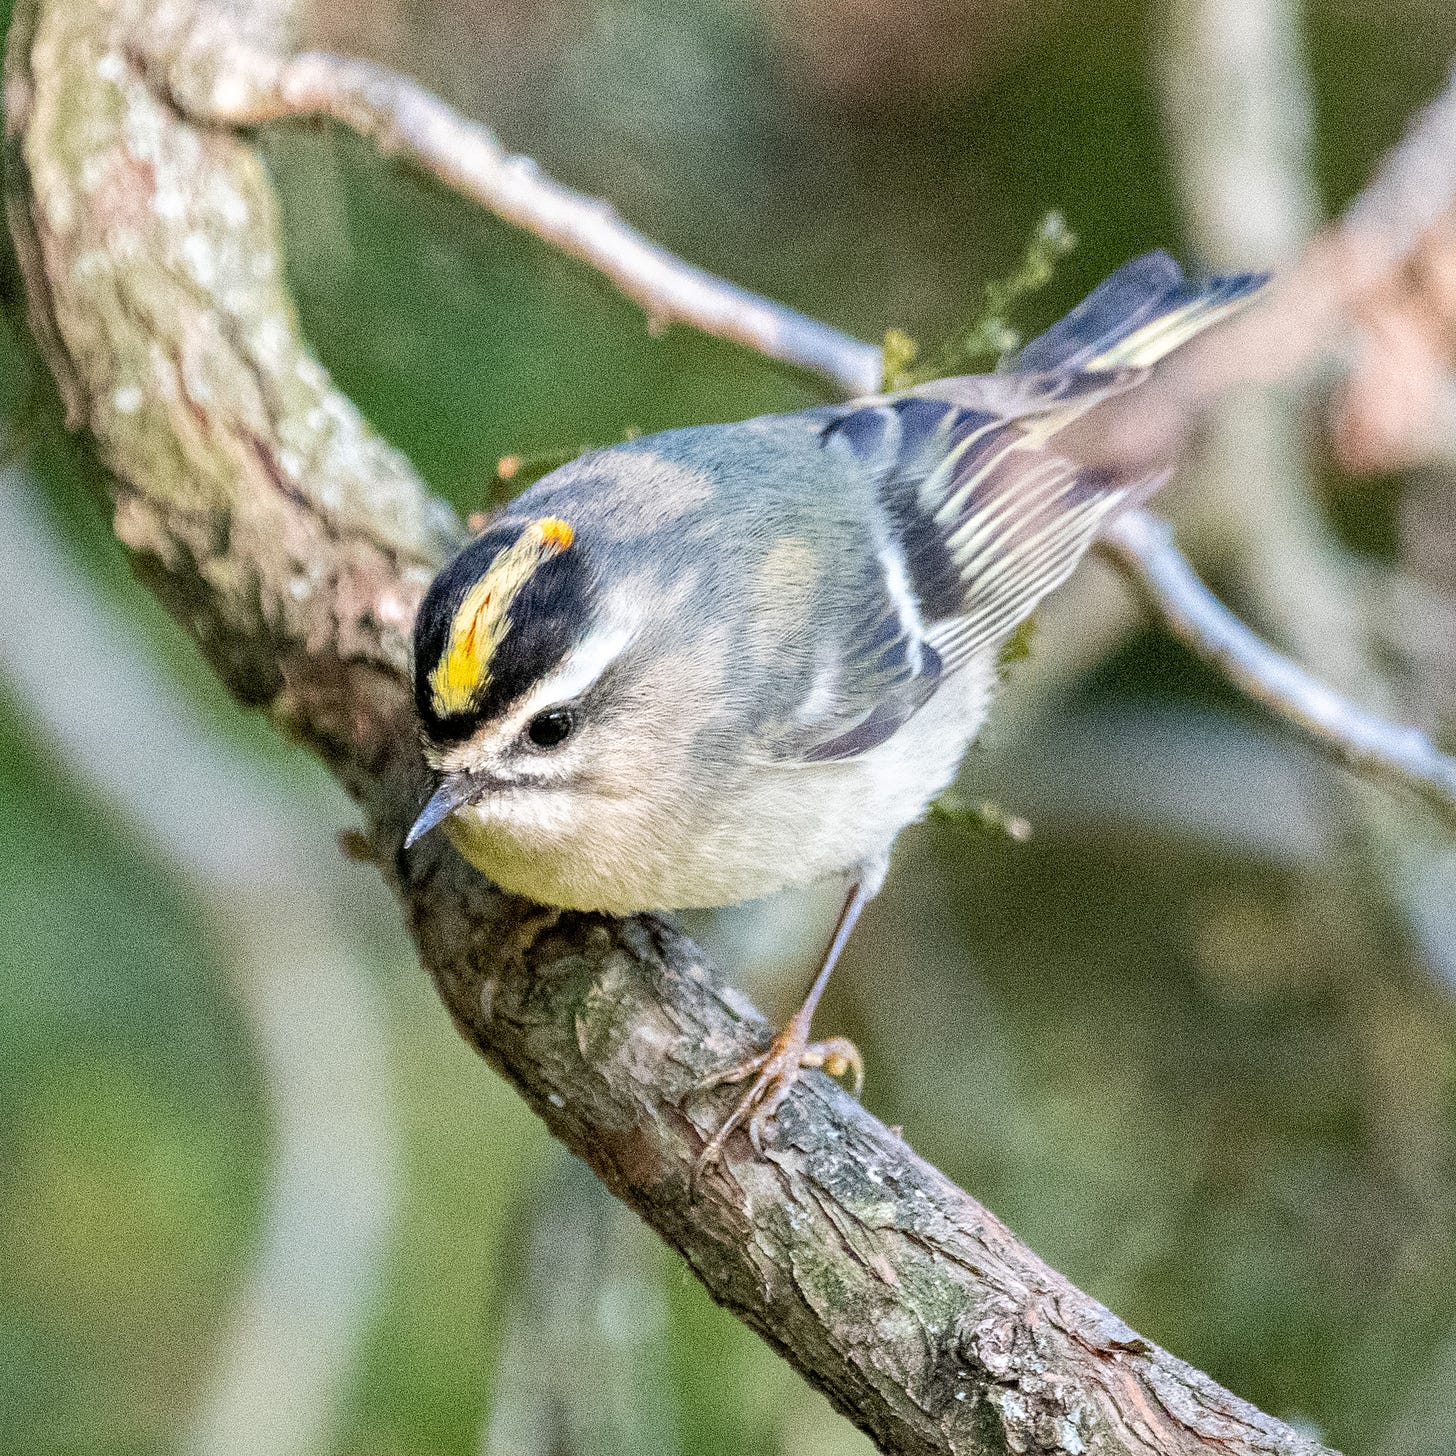 A close-up of a golden-crowned kinglet, looking pensive, with a slim streak of red running down through its golden crown